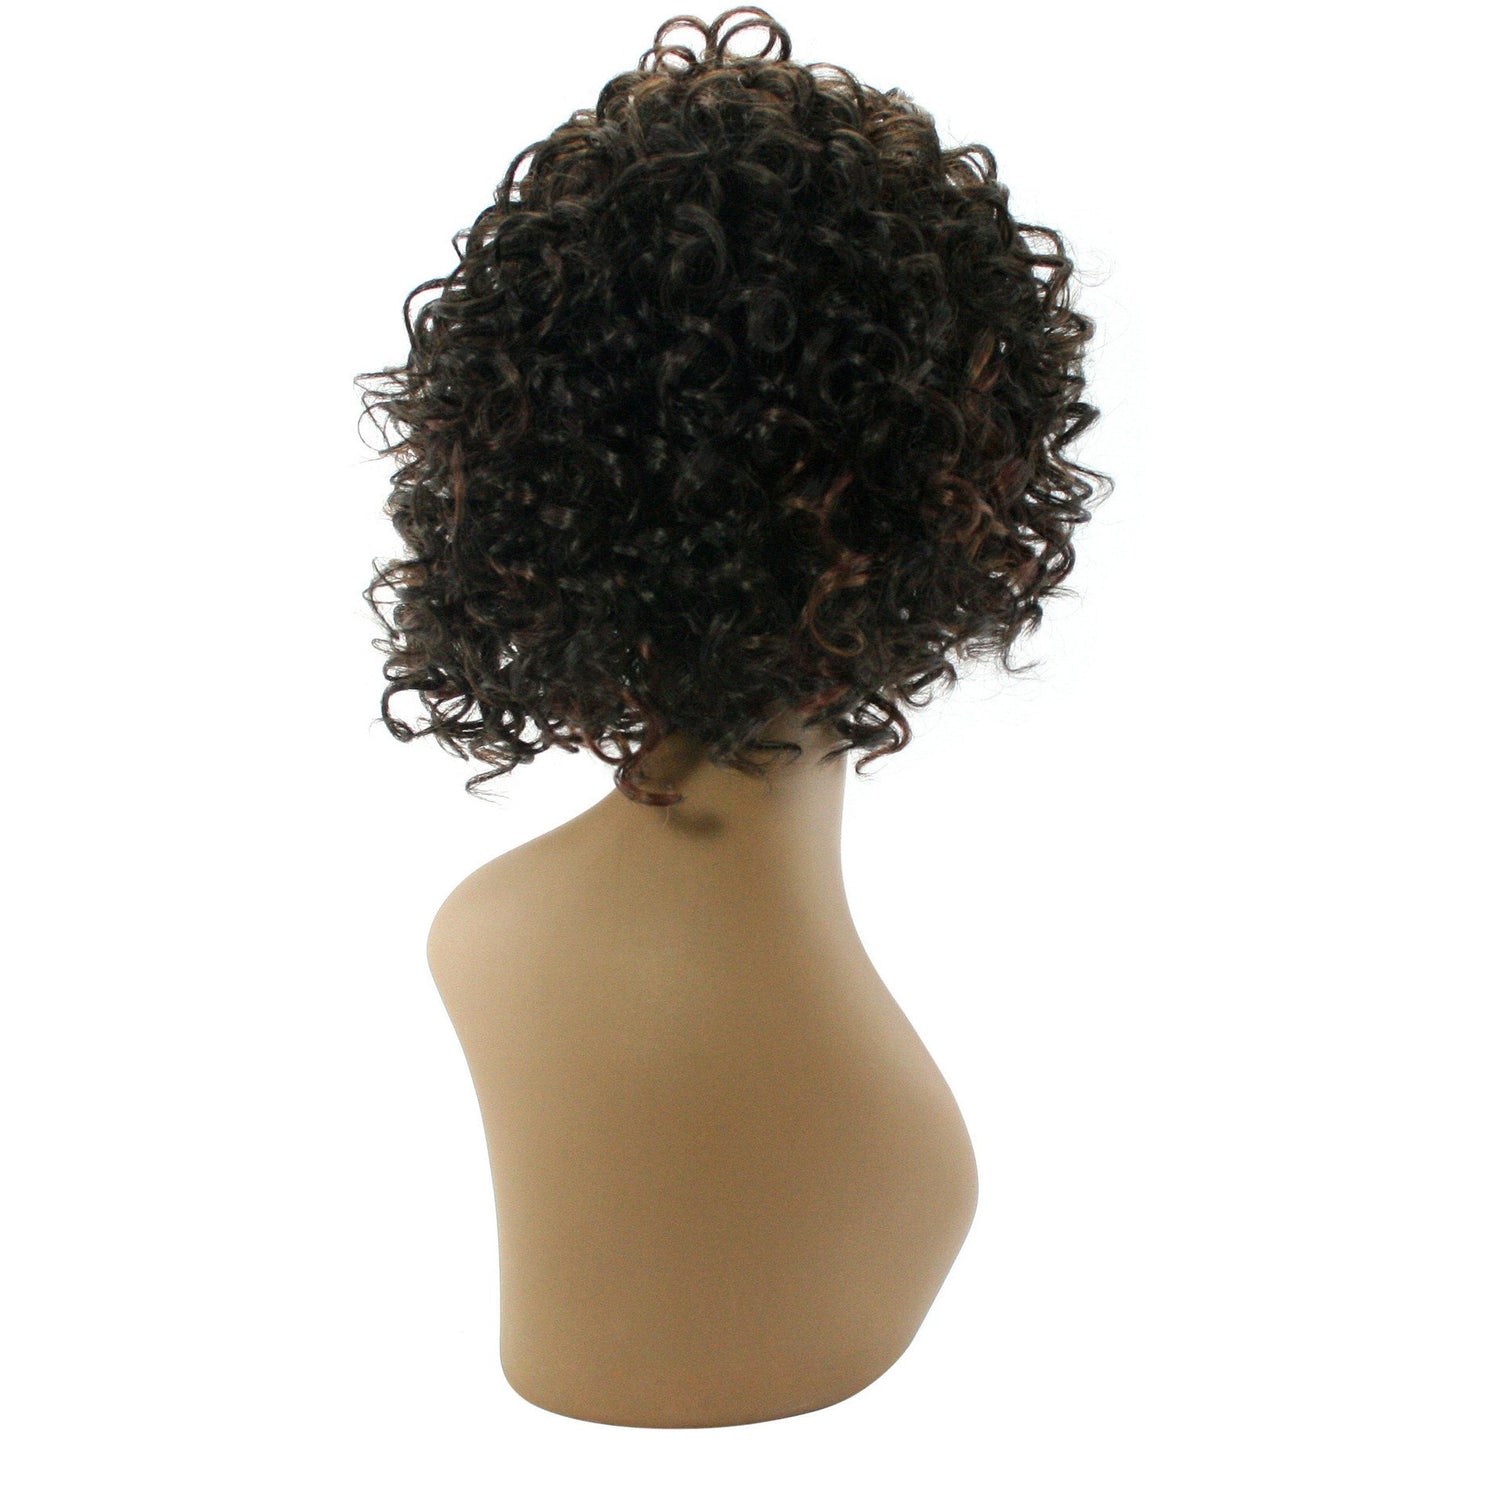 Unique's 100% Human Hair Full Wig / Style "A7" - BeautyGiant USA